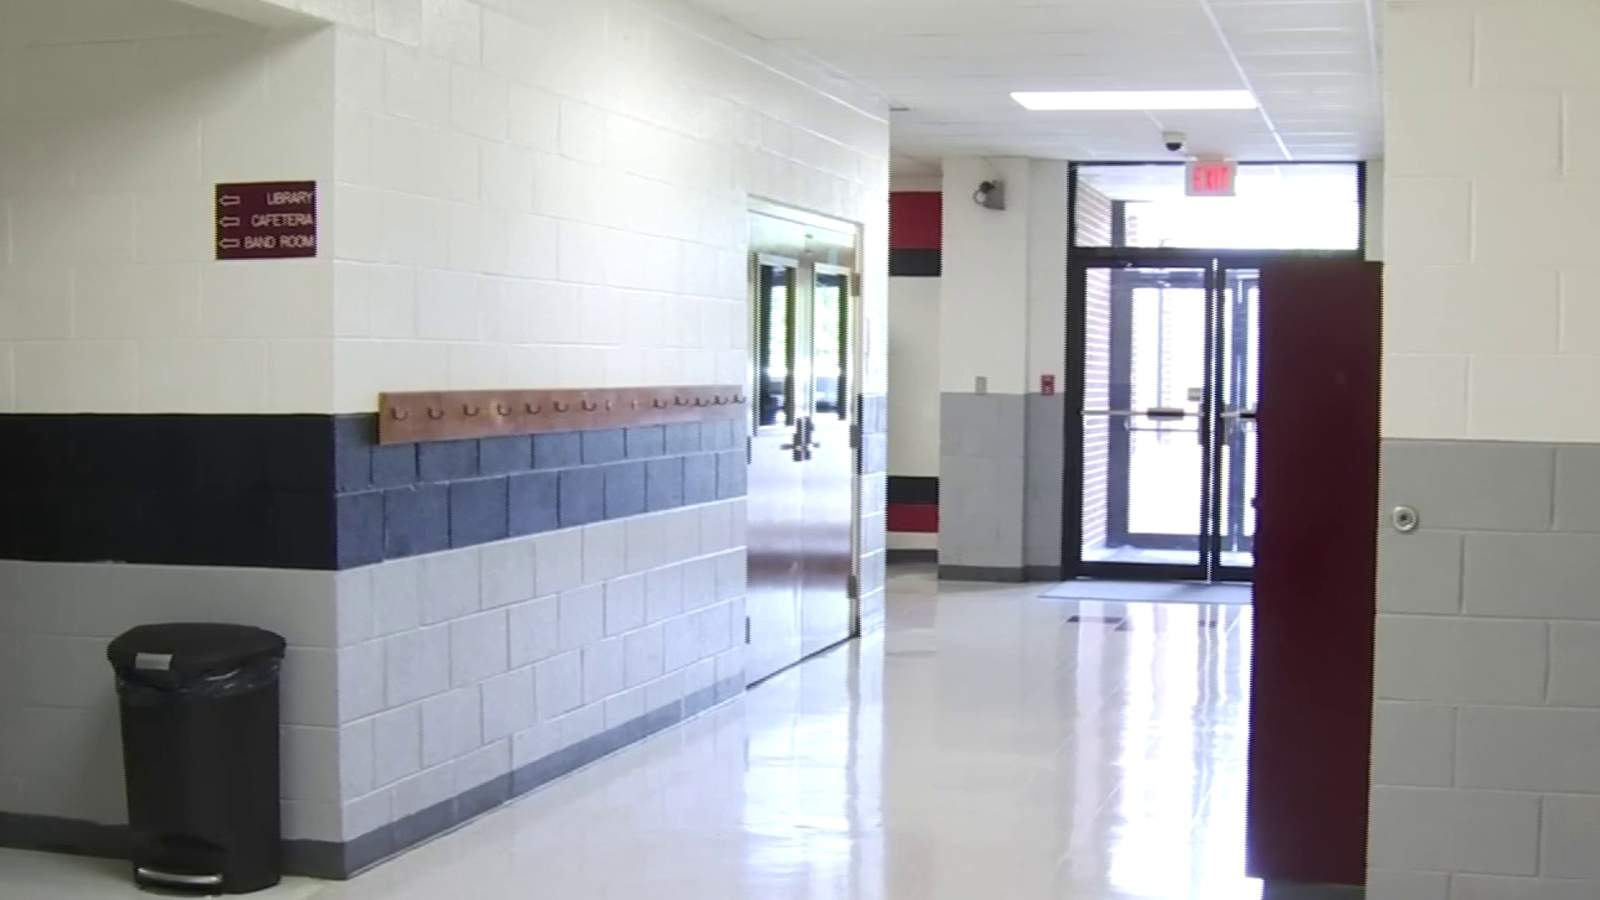 Danville private school to reopen after closing when 6 students, staff tested positive for COVID-19